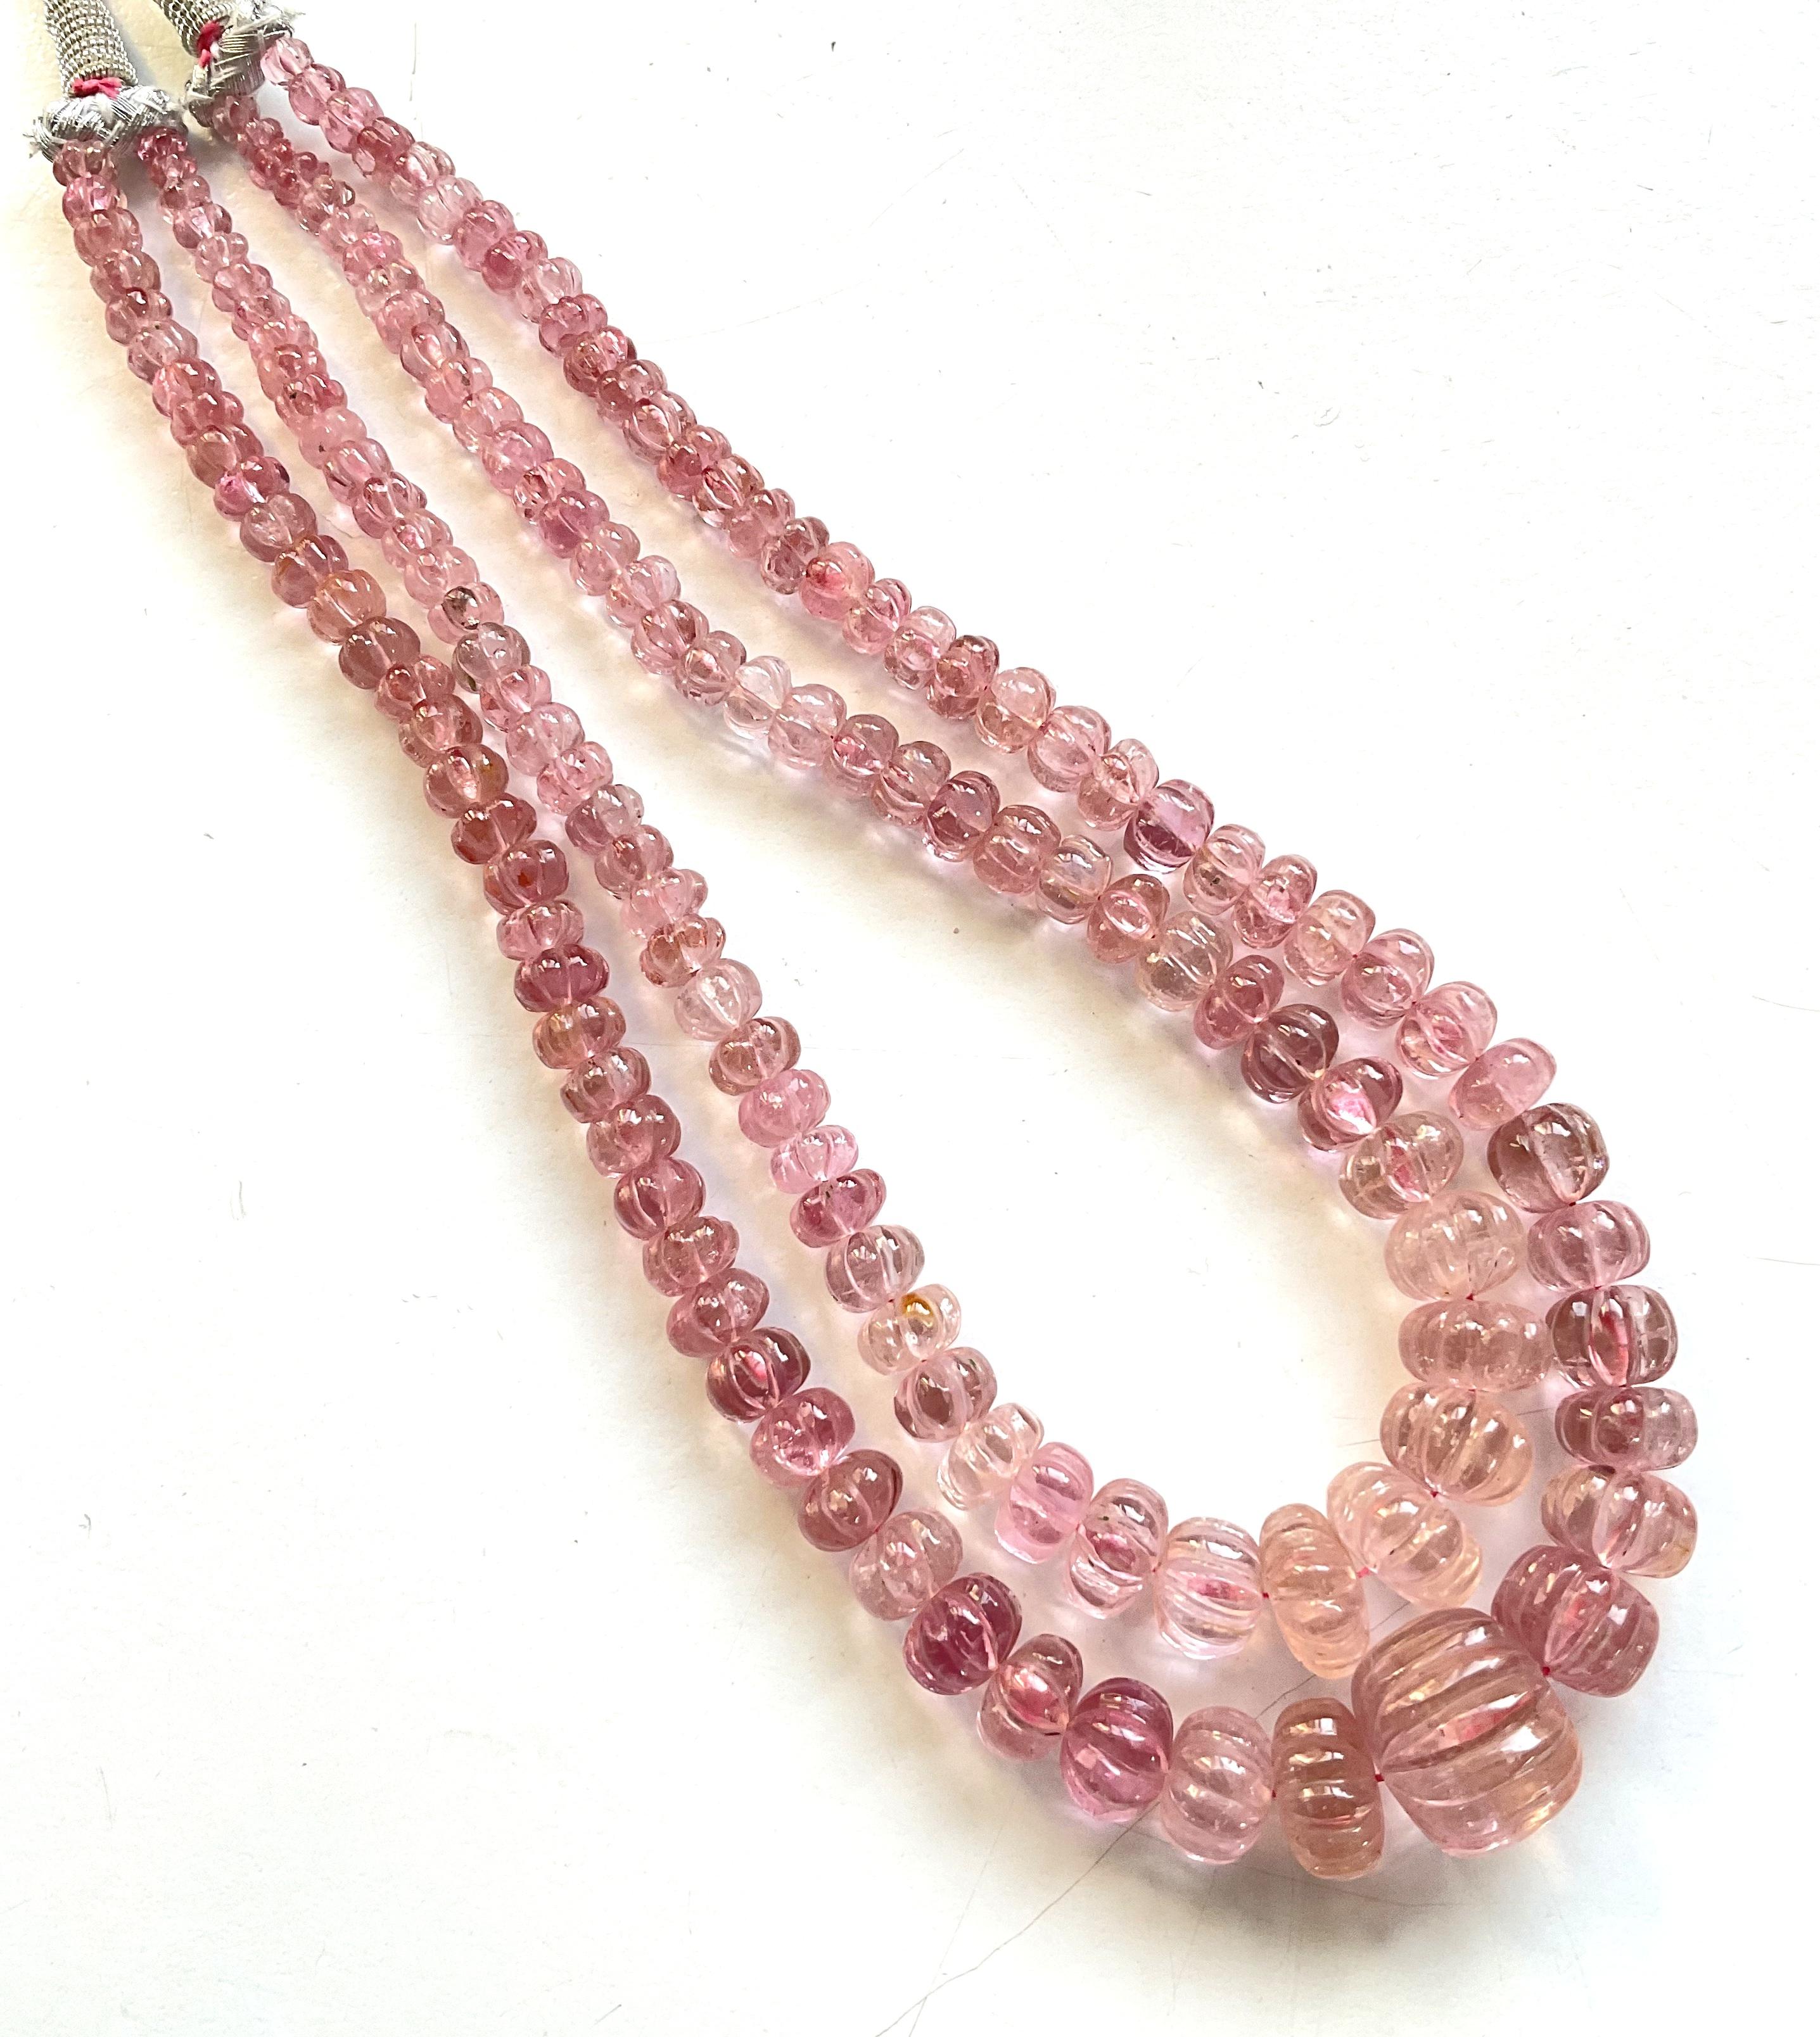 Bead 396.95 Carats pink Tourmaline carved melon beads necklace Jewelry Natural Gem For Sale